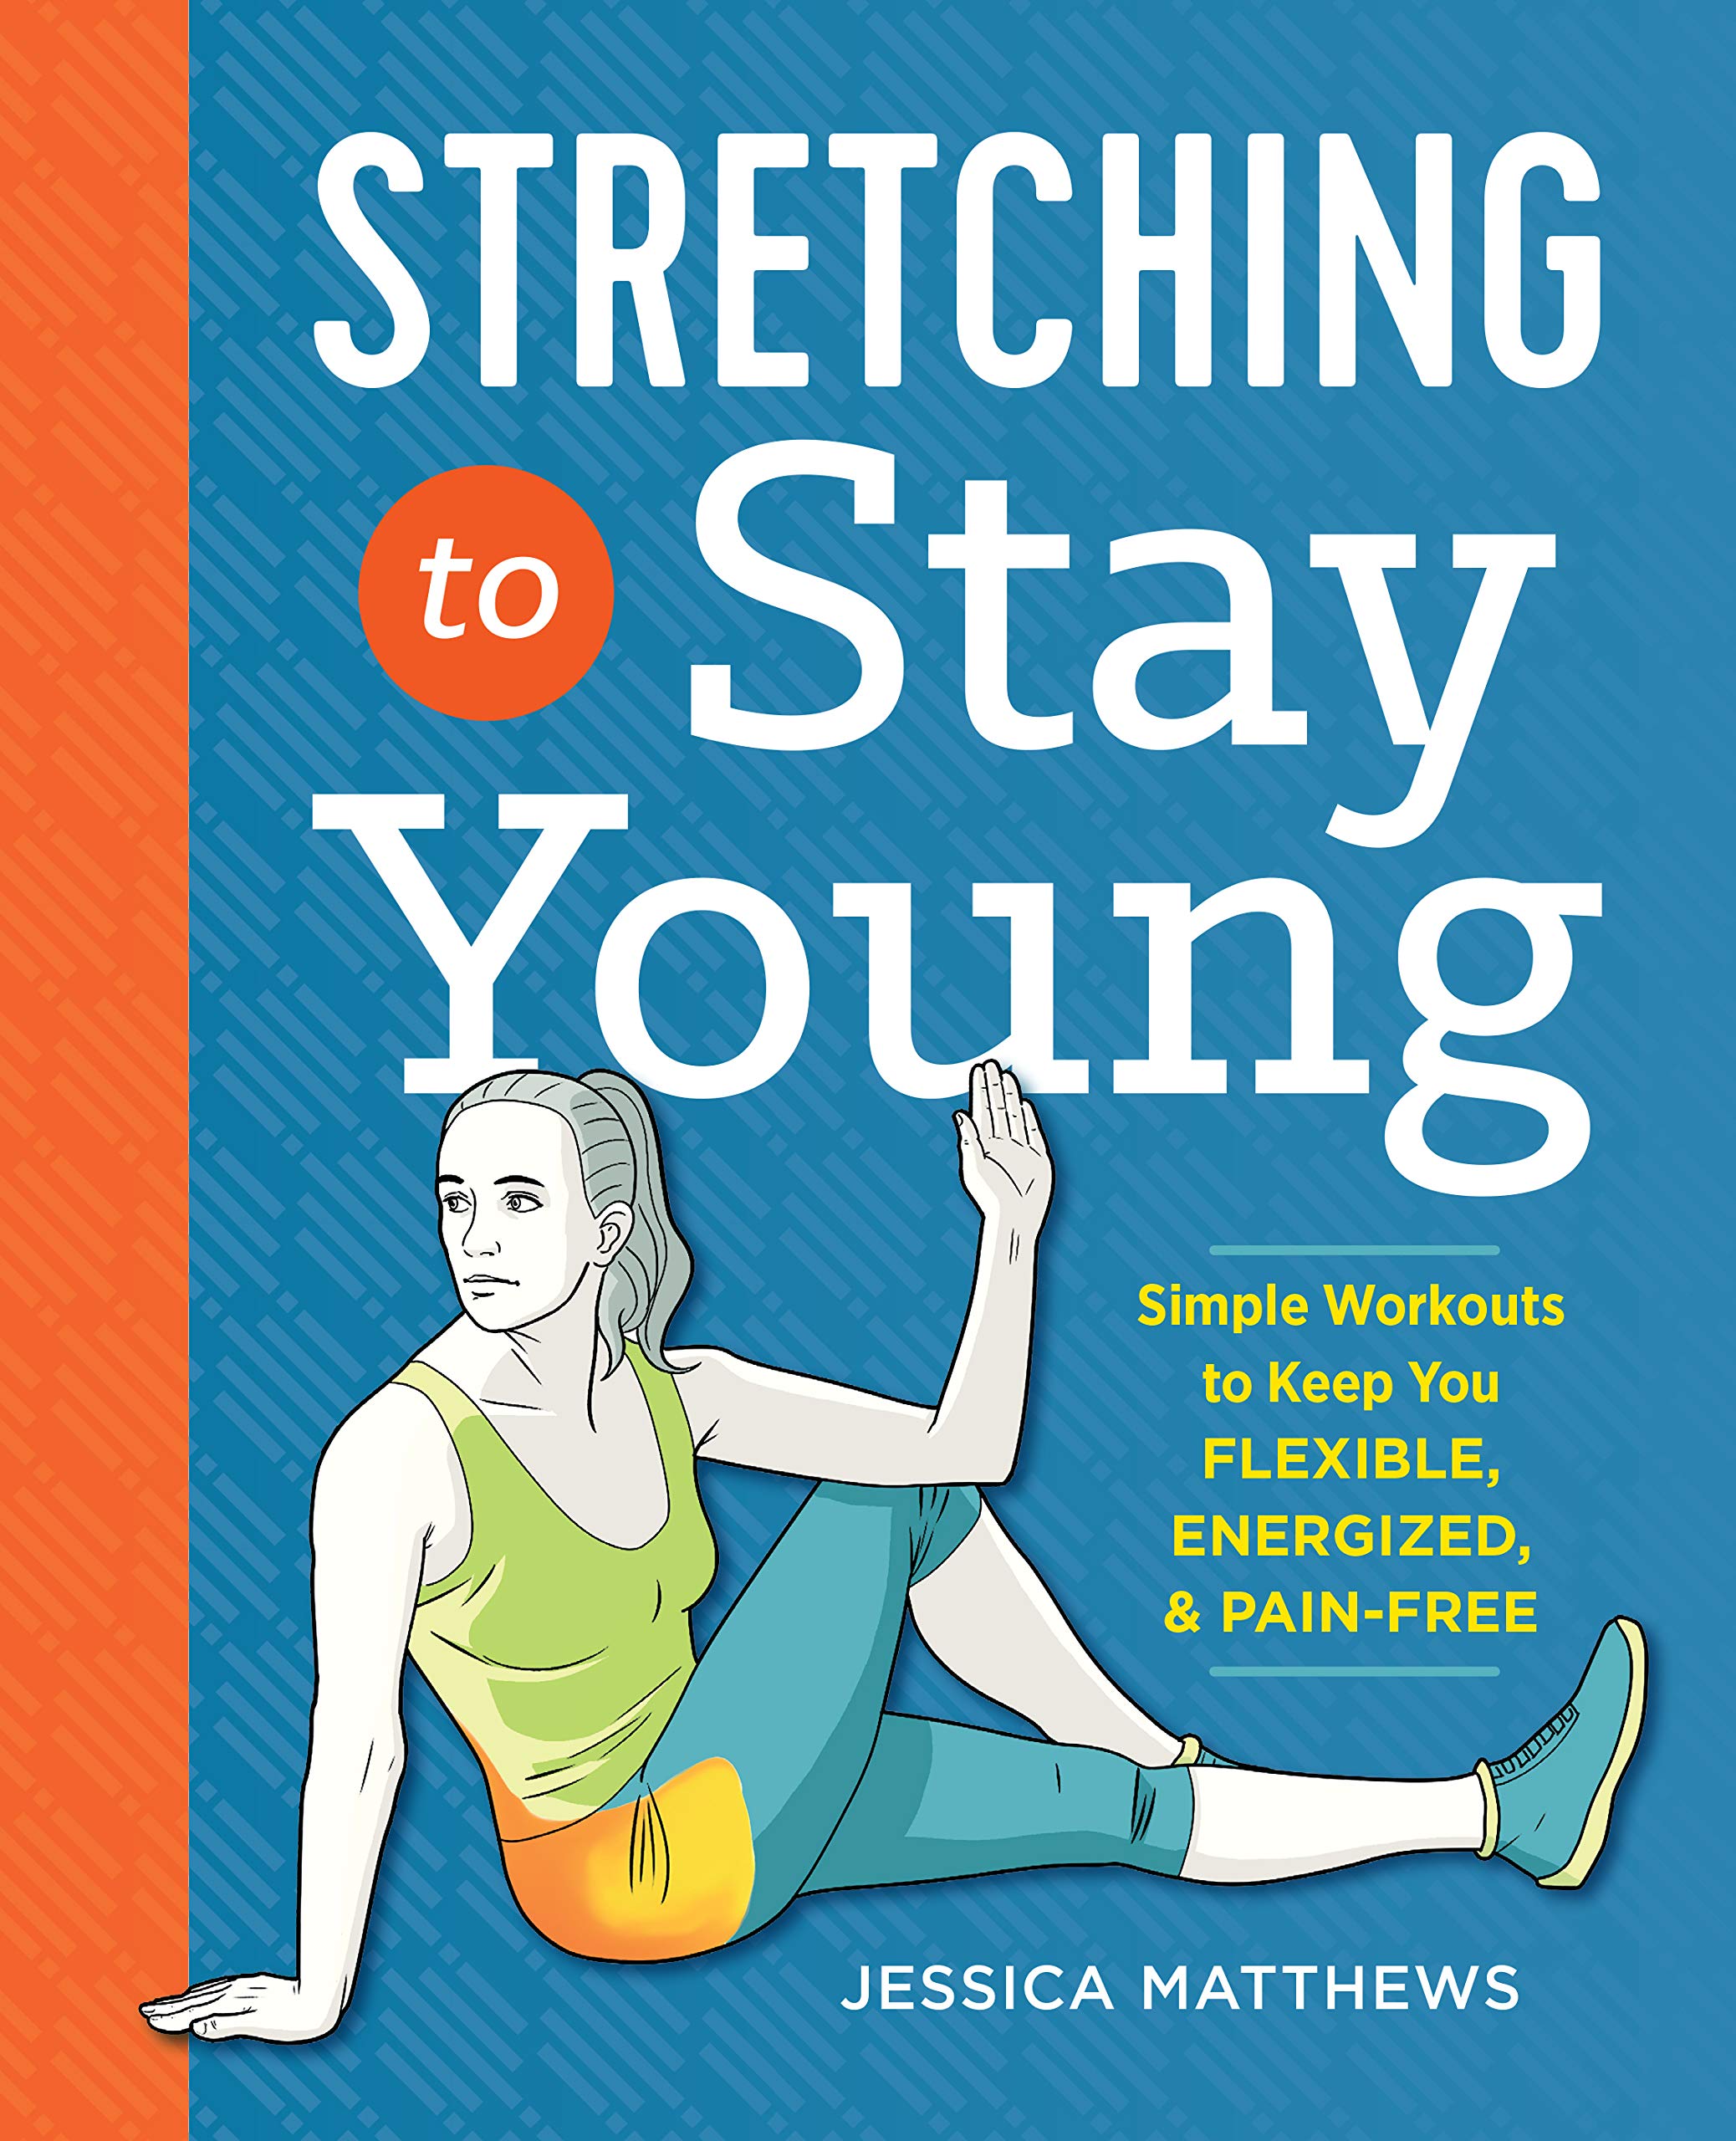 Book Stretching to Stay Young (Simple Workouts to Keep You Flexible, Energized, and Pain Free) by Jessica Matthews